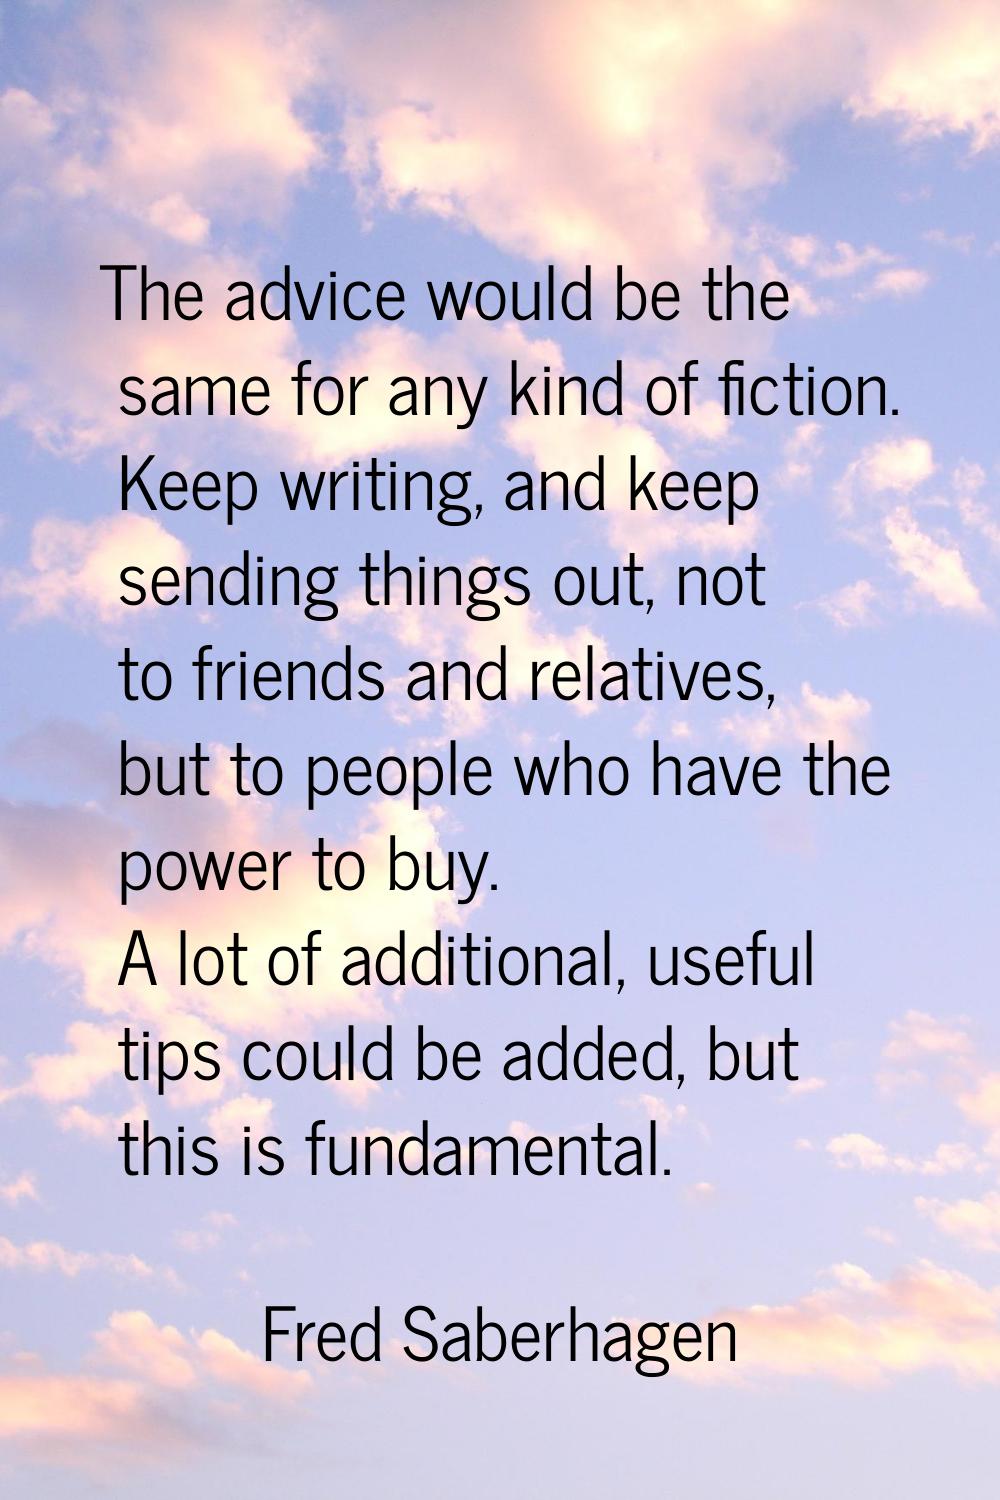 The advice would be the same for any kind of fiction. Keep writing, and keep sending things out, no